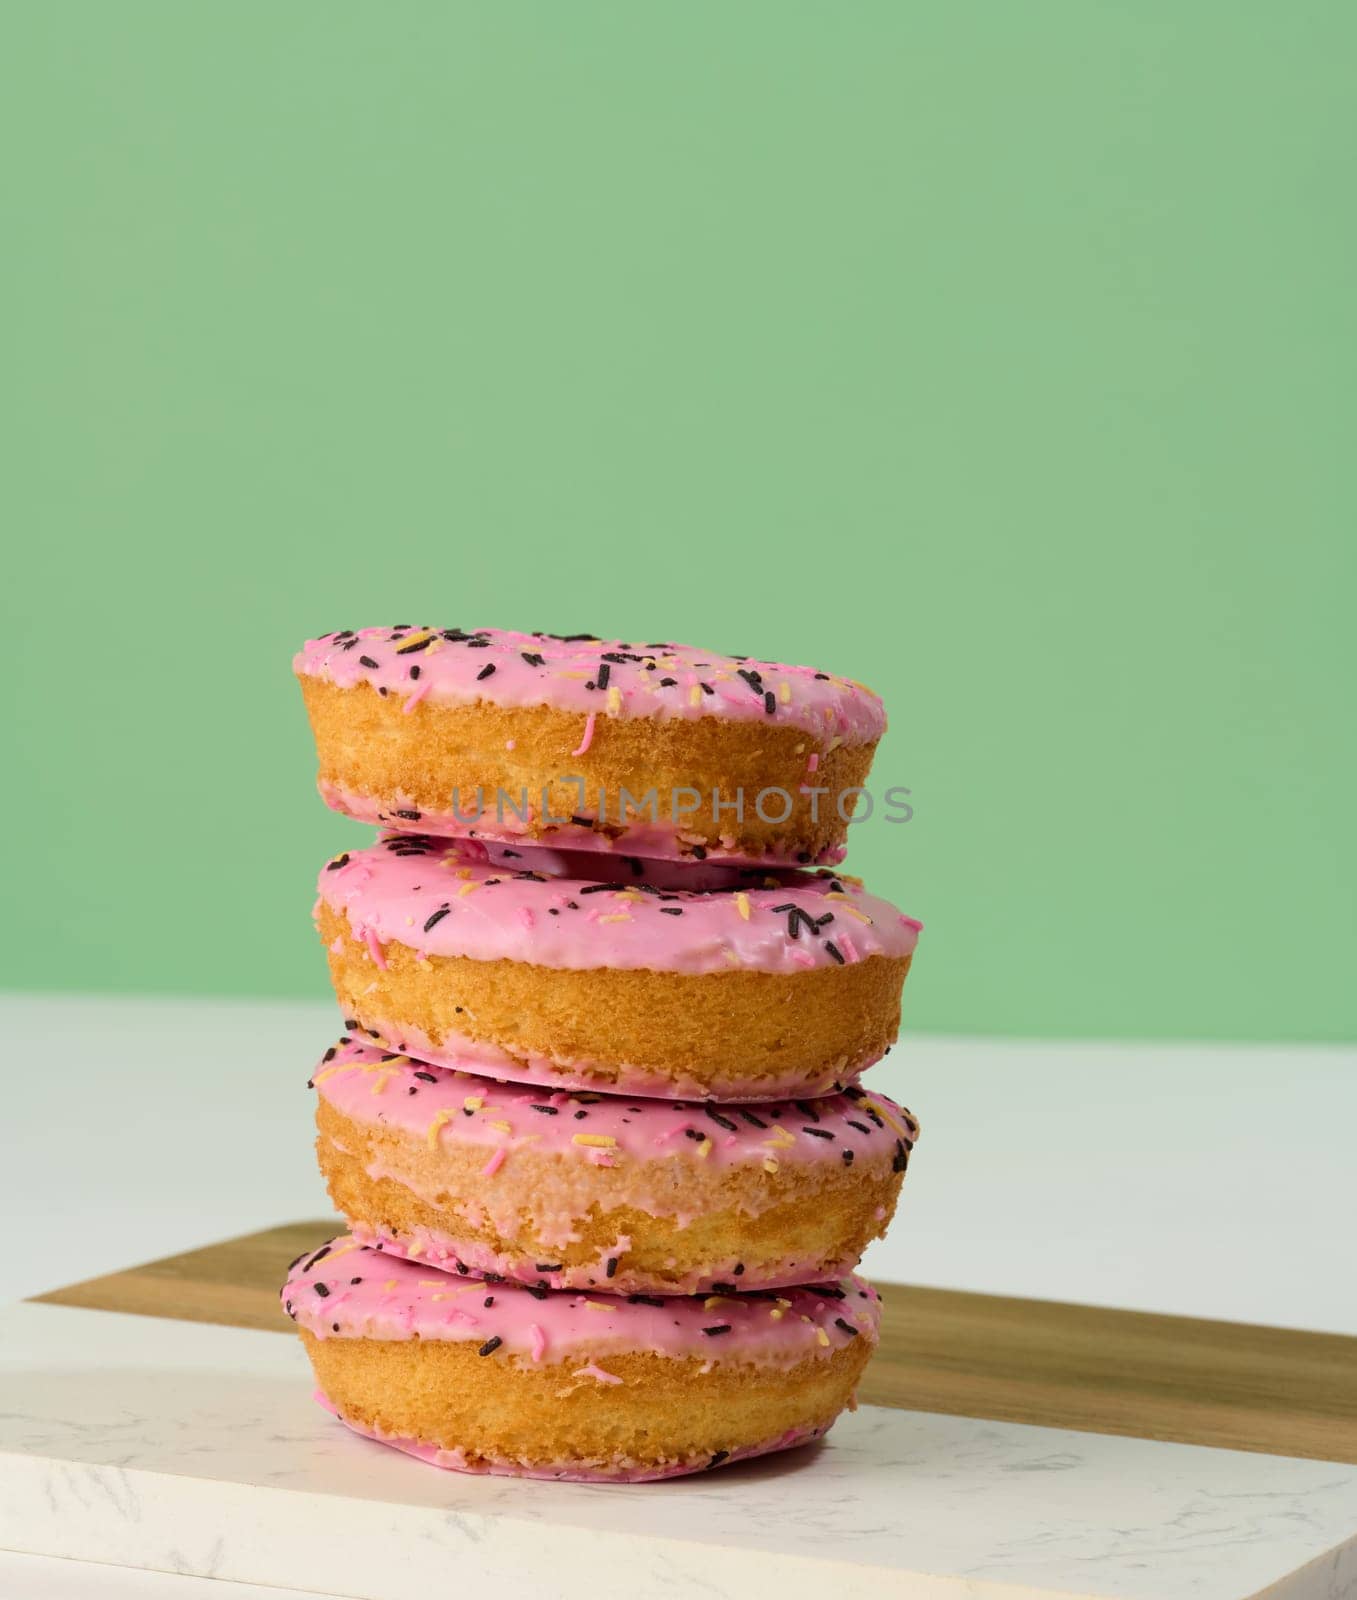 Donut covered with pink glaze and sprinkled with colorful sprinkles by ndanko